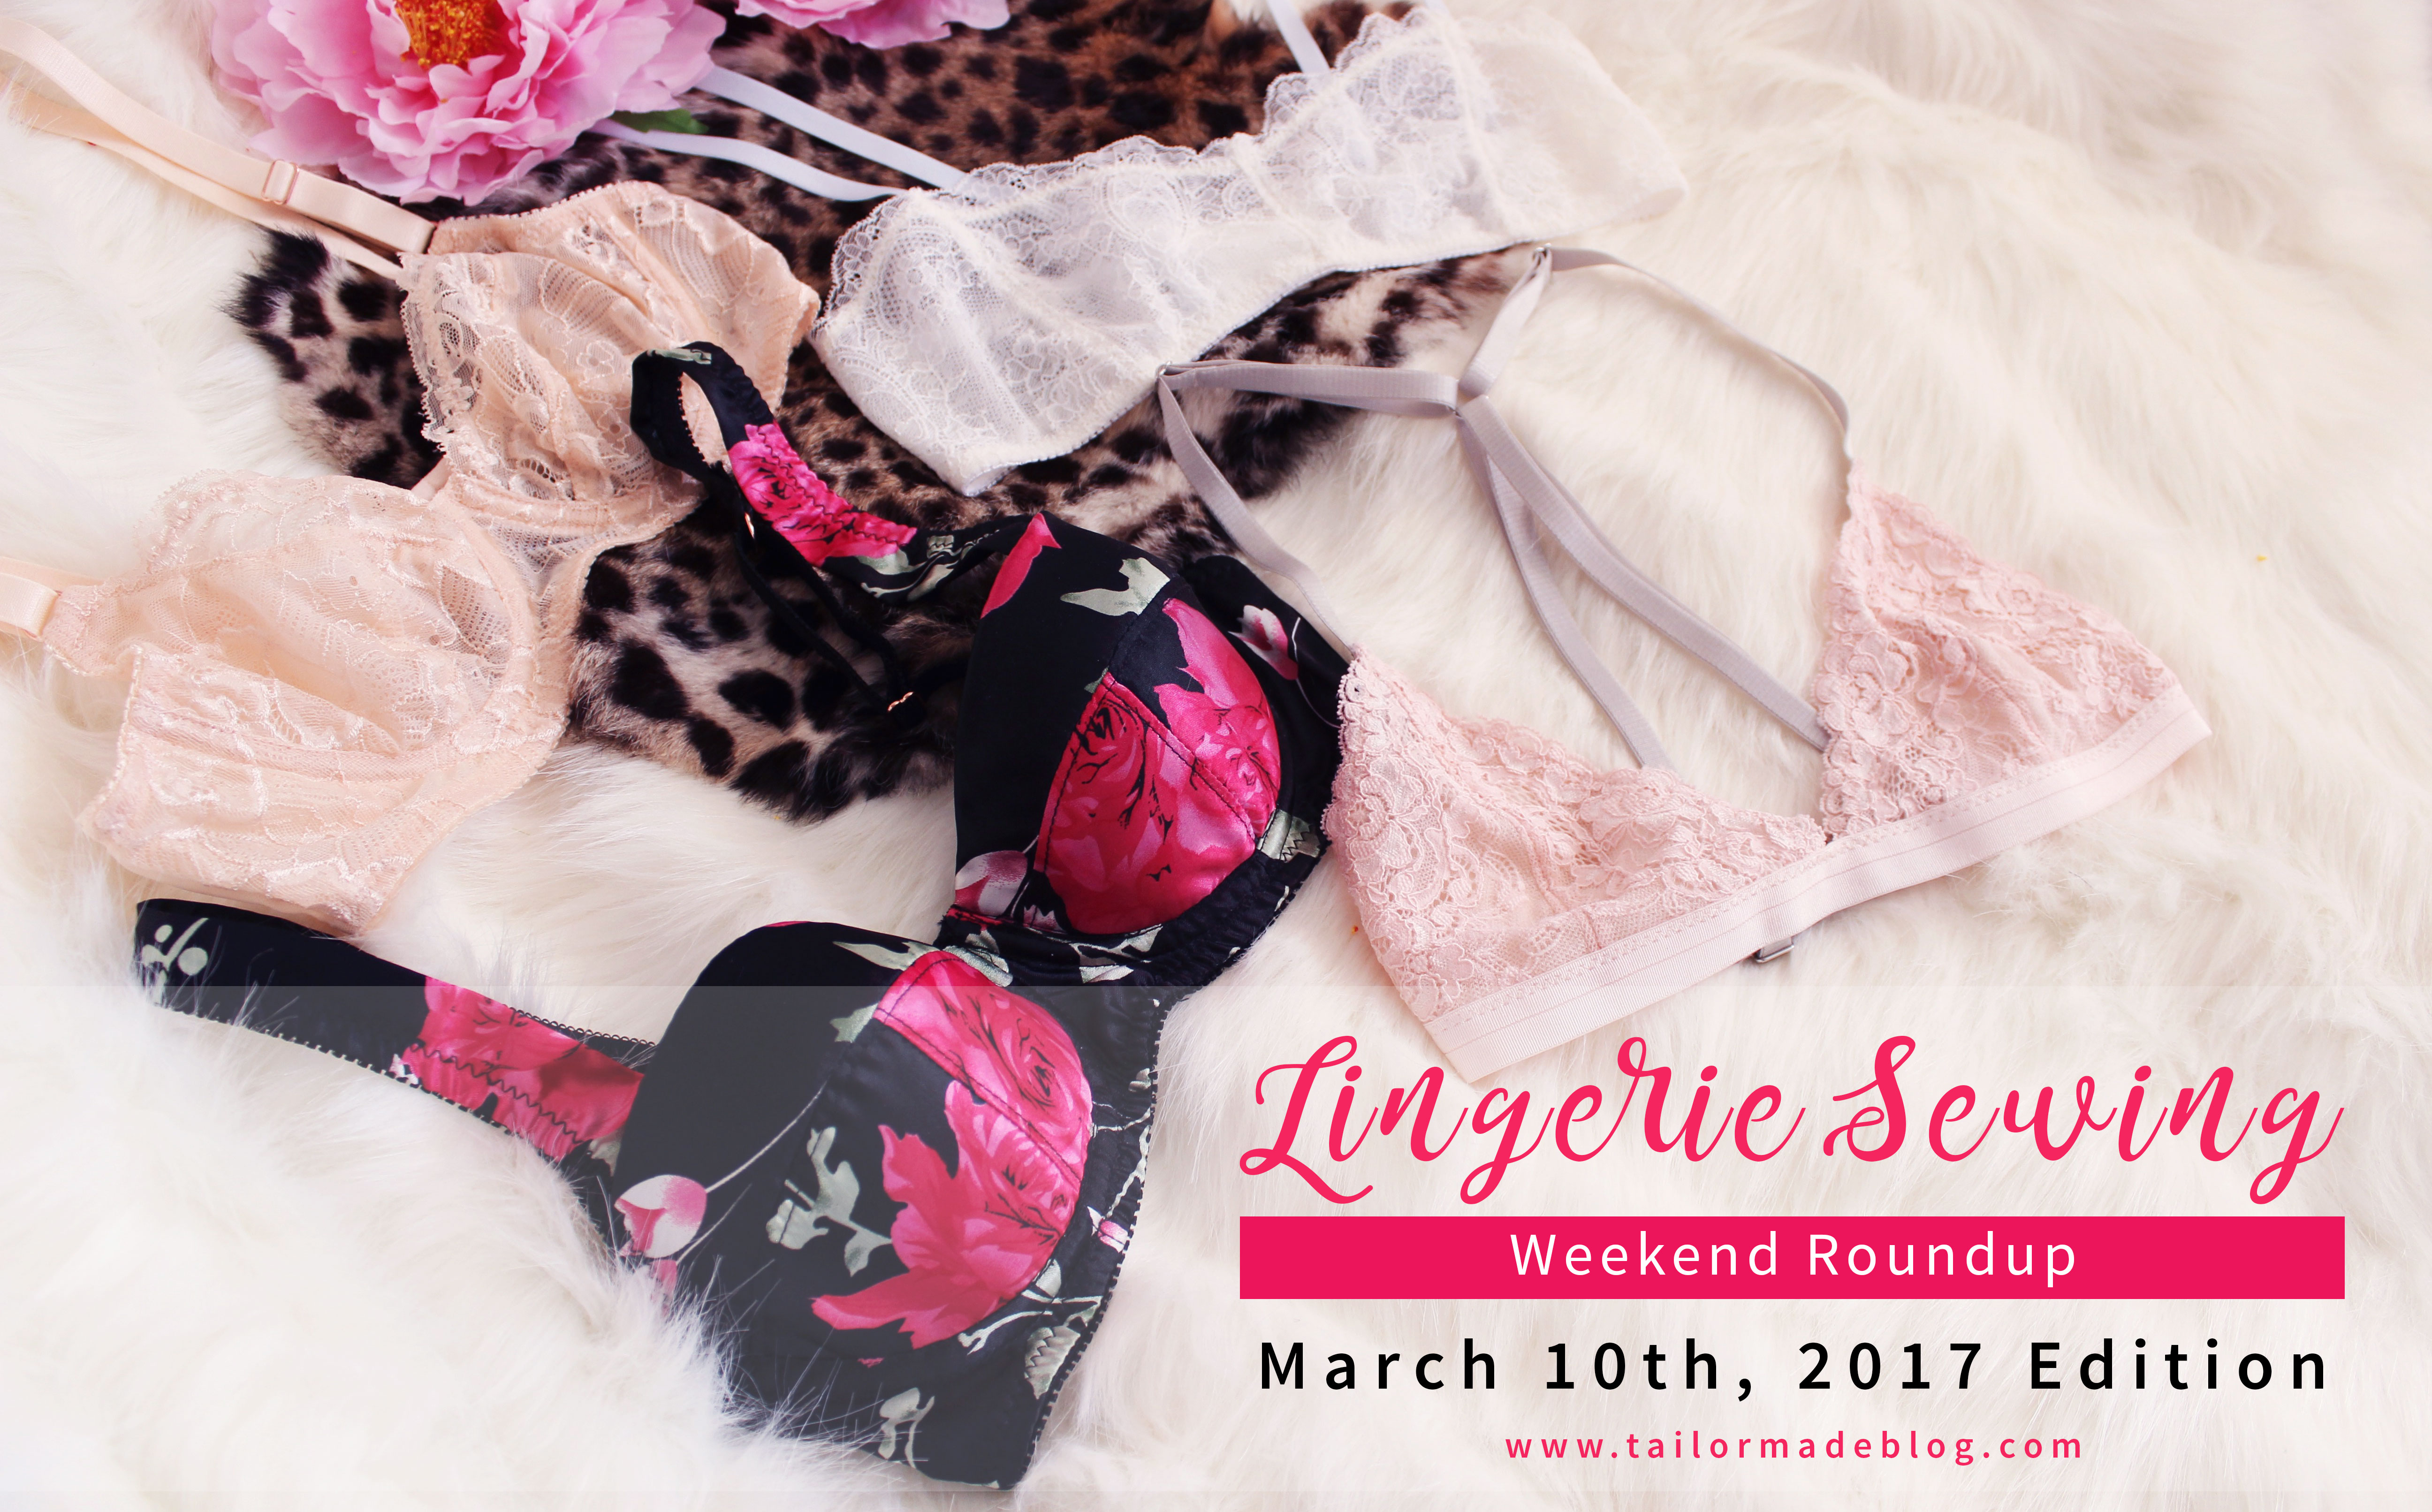 Lingerie Sewing Weekend Round Up